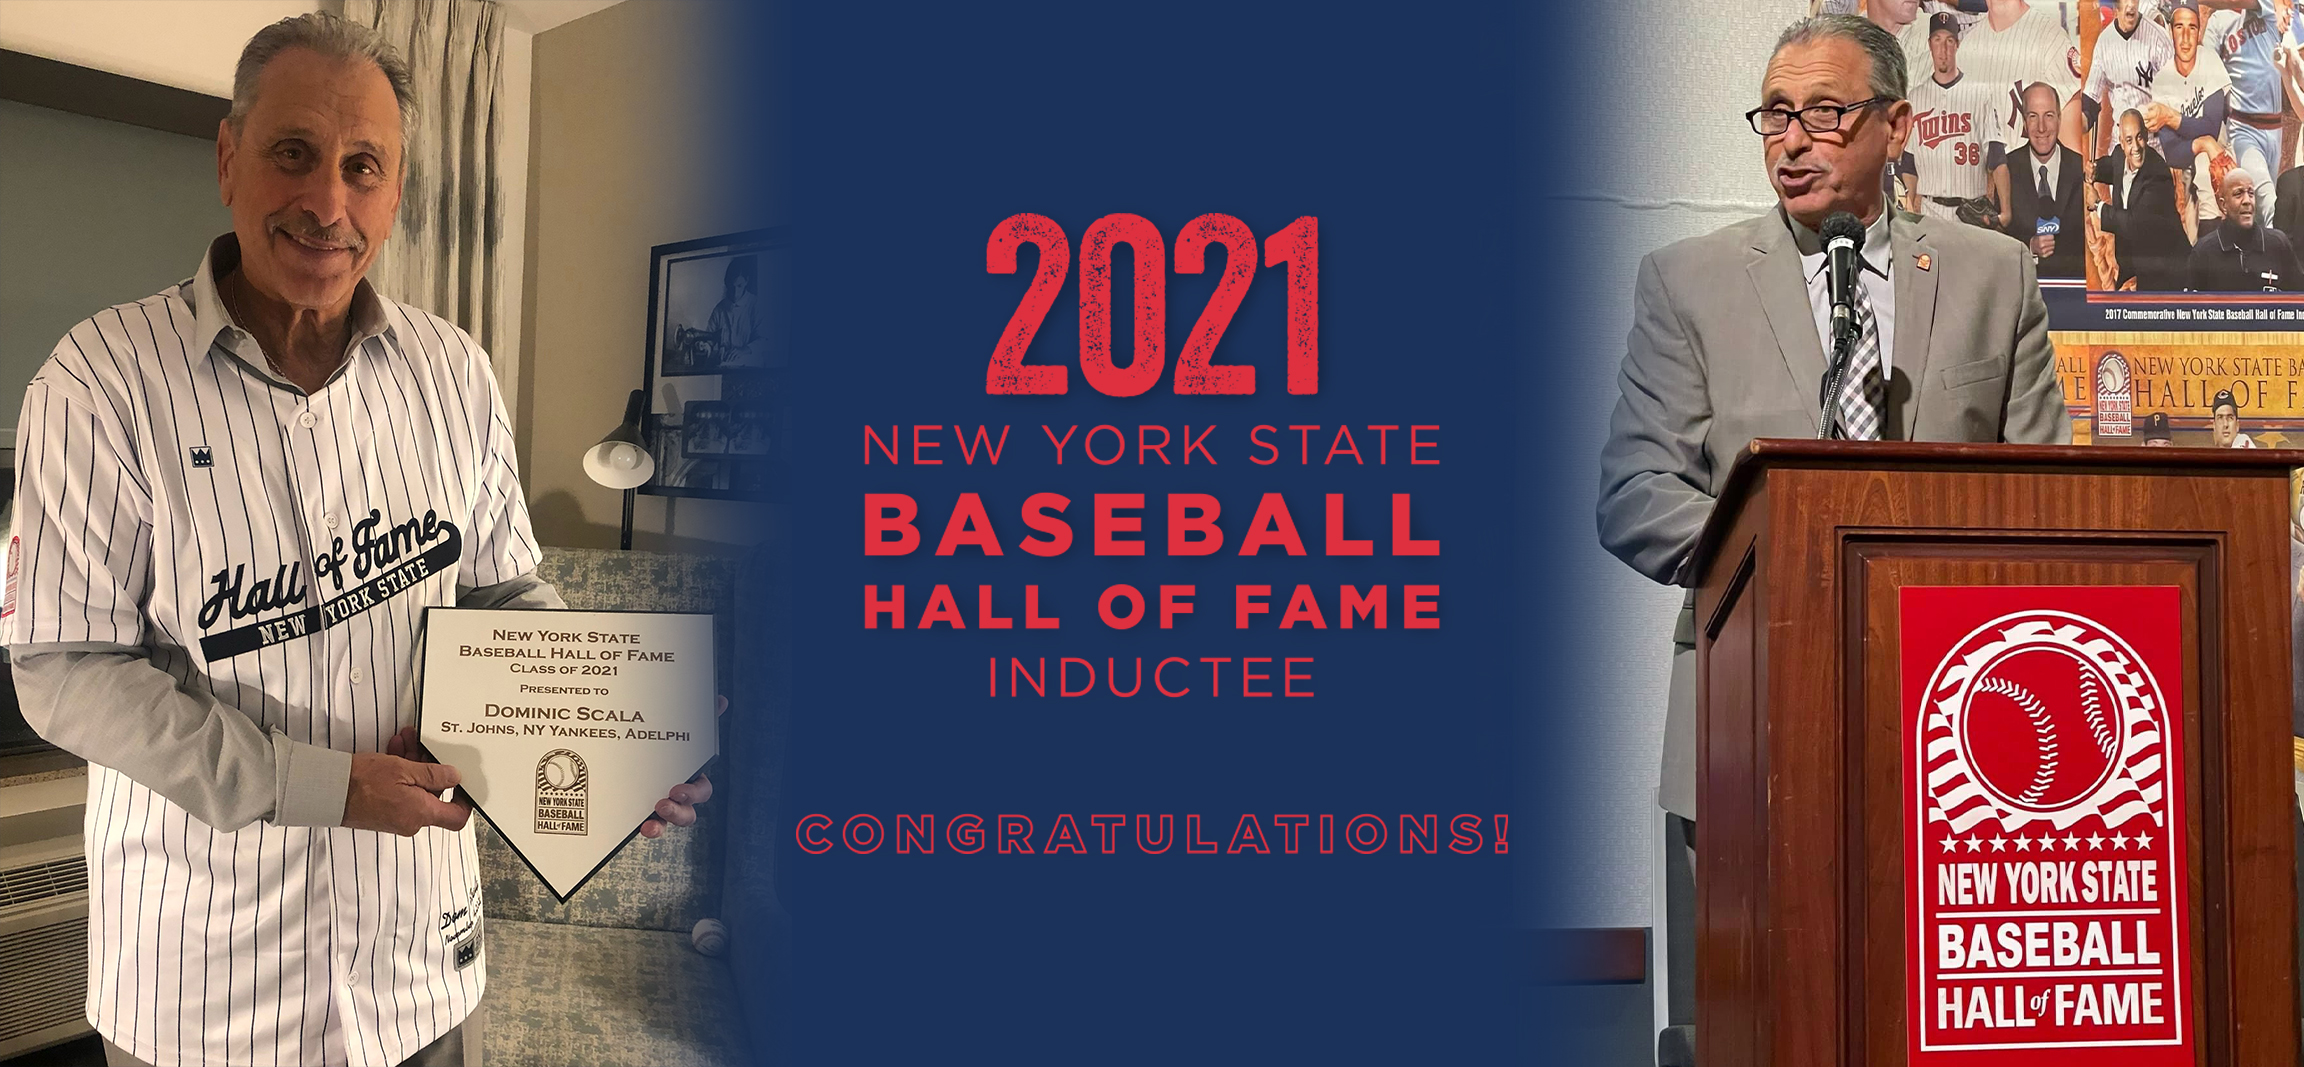 Congratulations 2021 New York State Baseball Hall of Fame Inductee Dom Scala